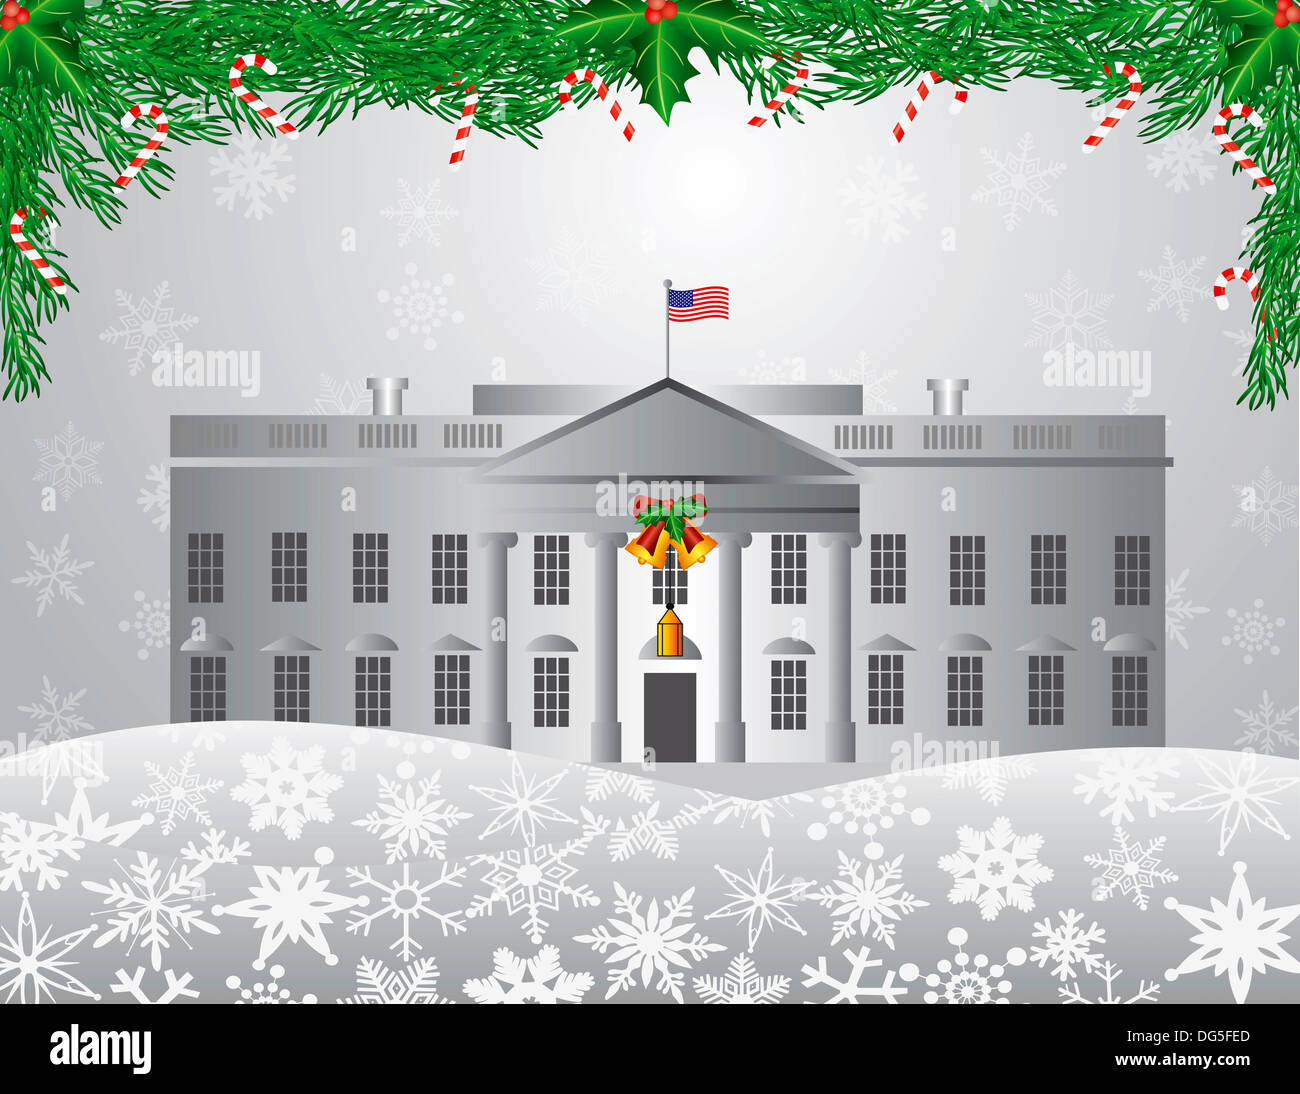 Washington DC White House Building with Garland Candy Cane Holly Berries on Snowflakes Background Illustration Stock Photo